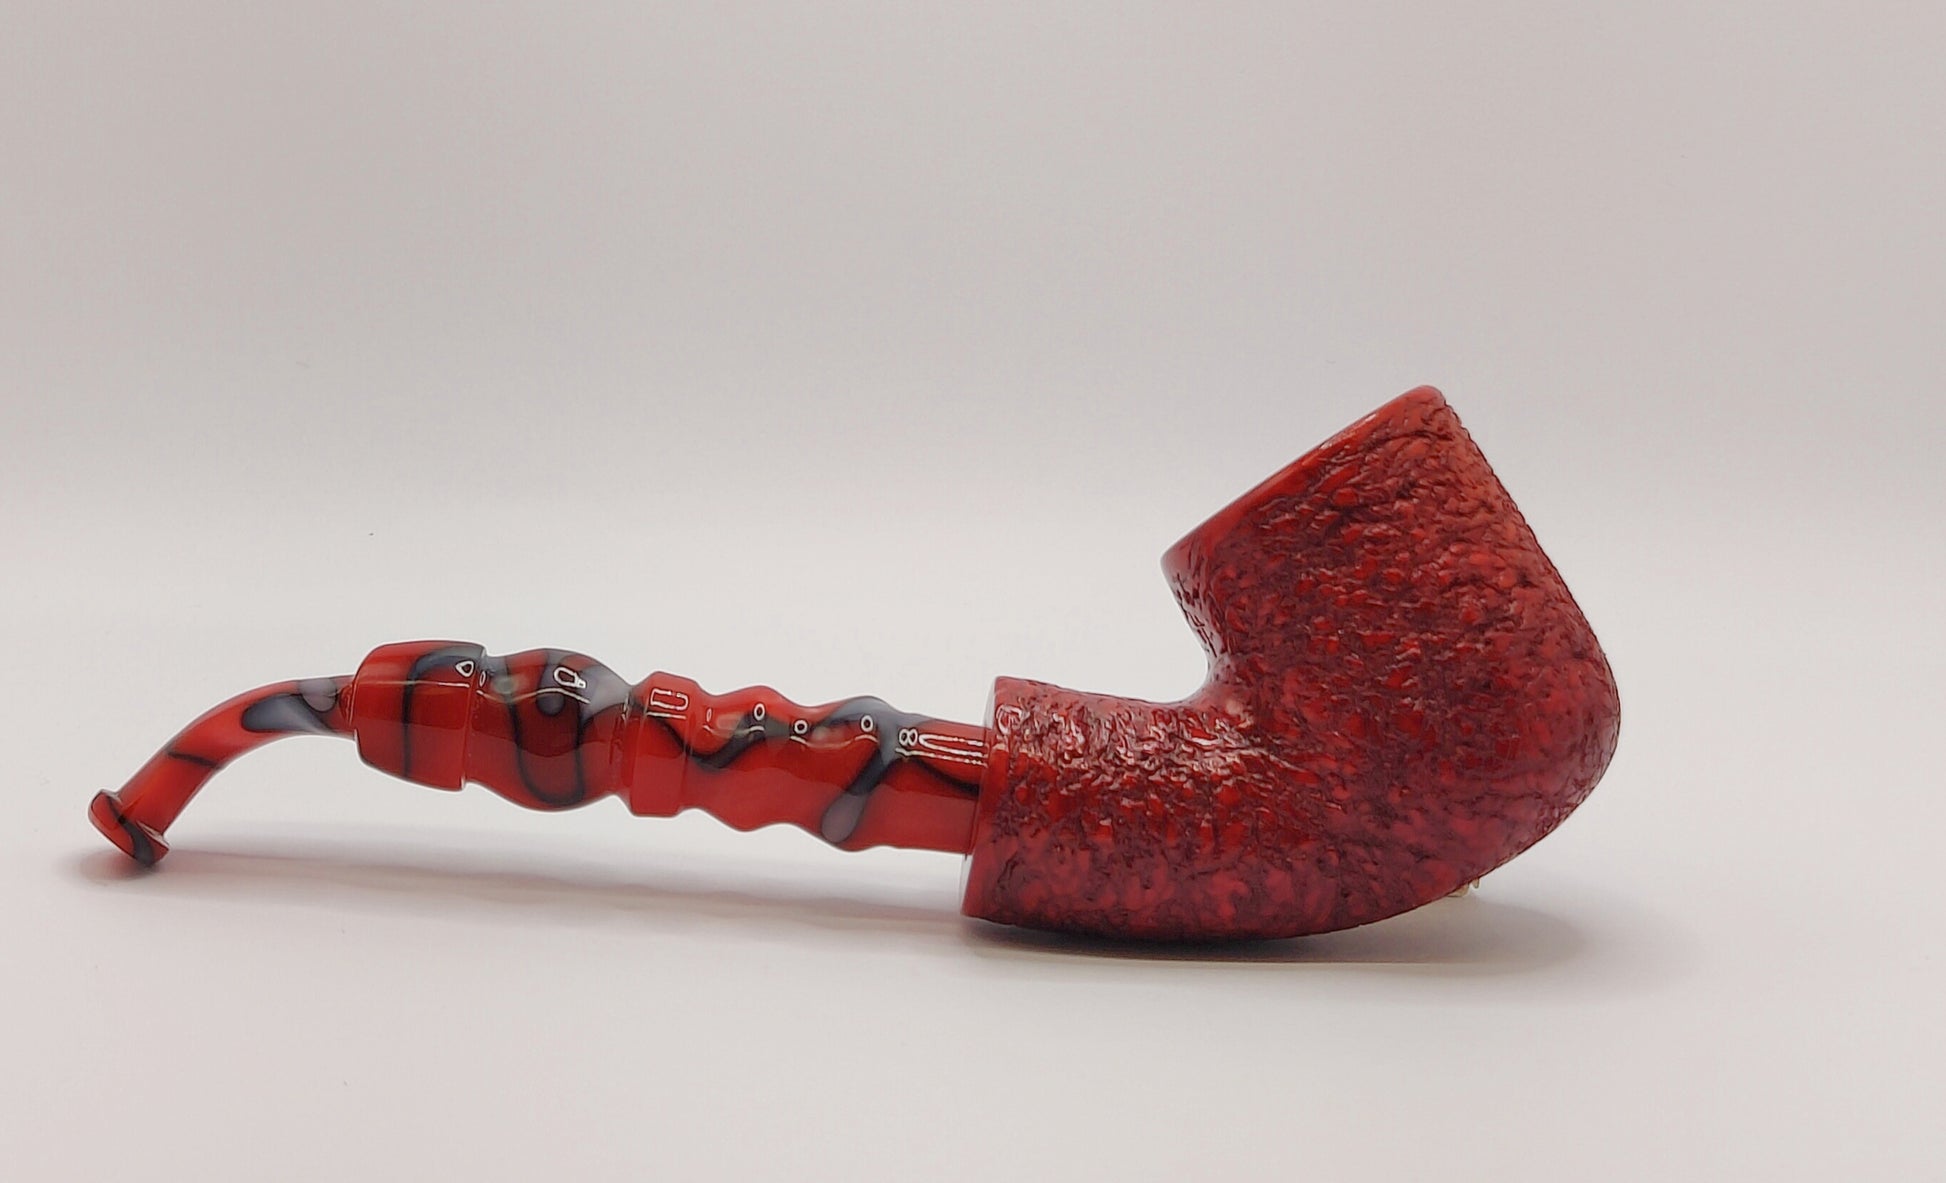 The Dragen, tobacco pipe - Afterburner Cigar store